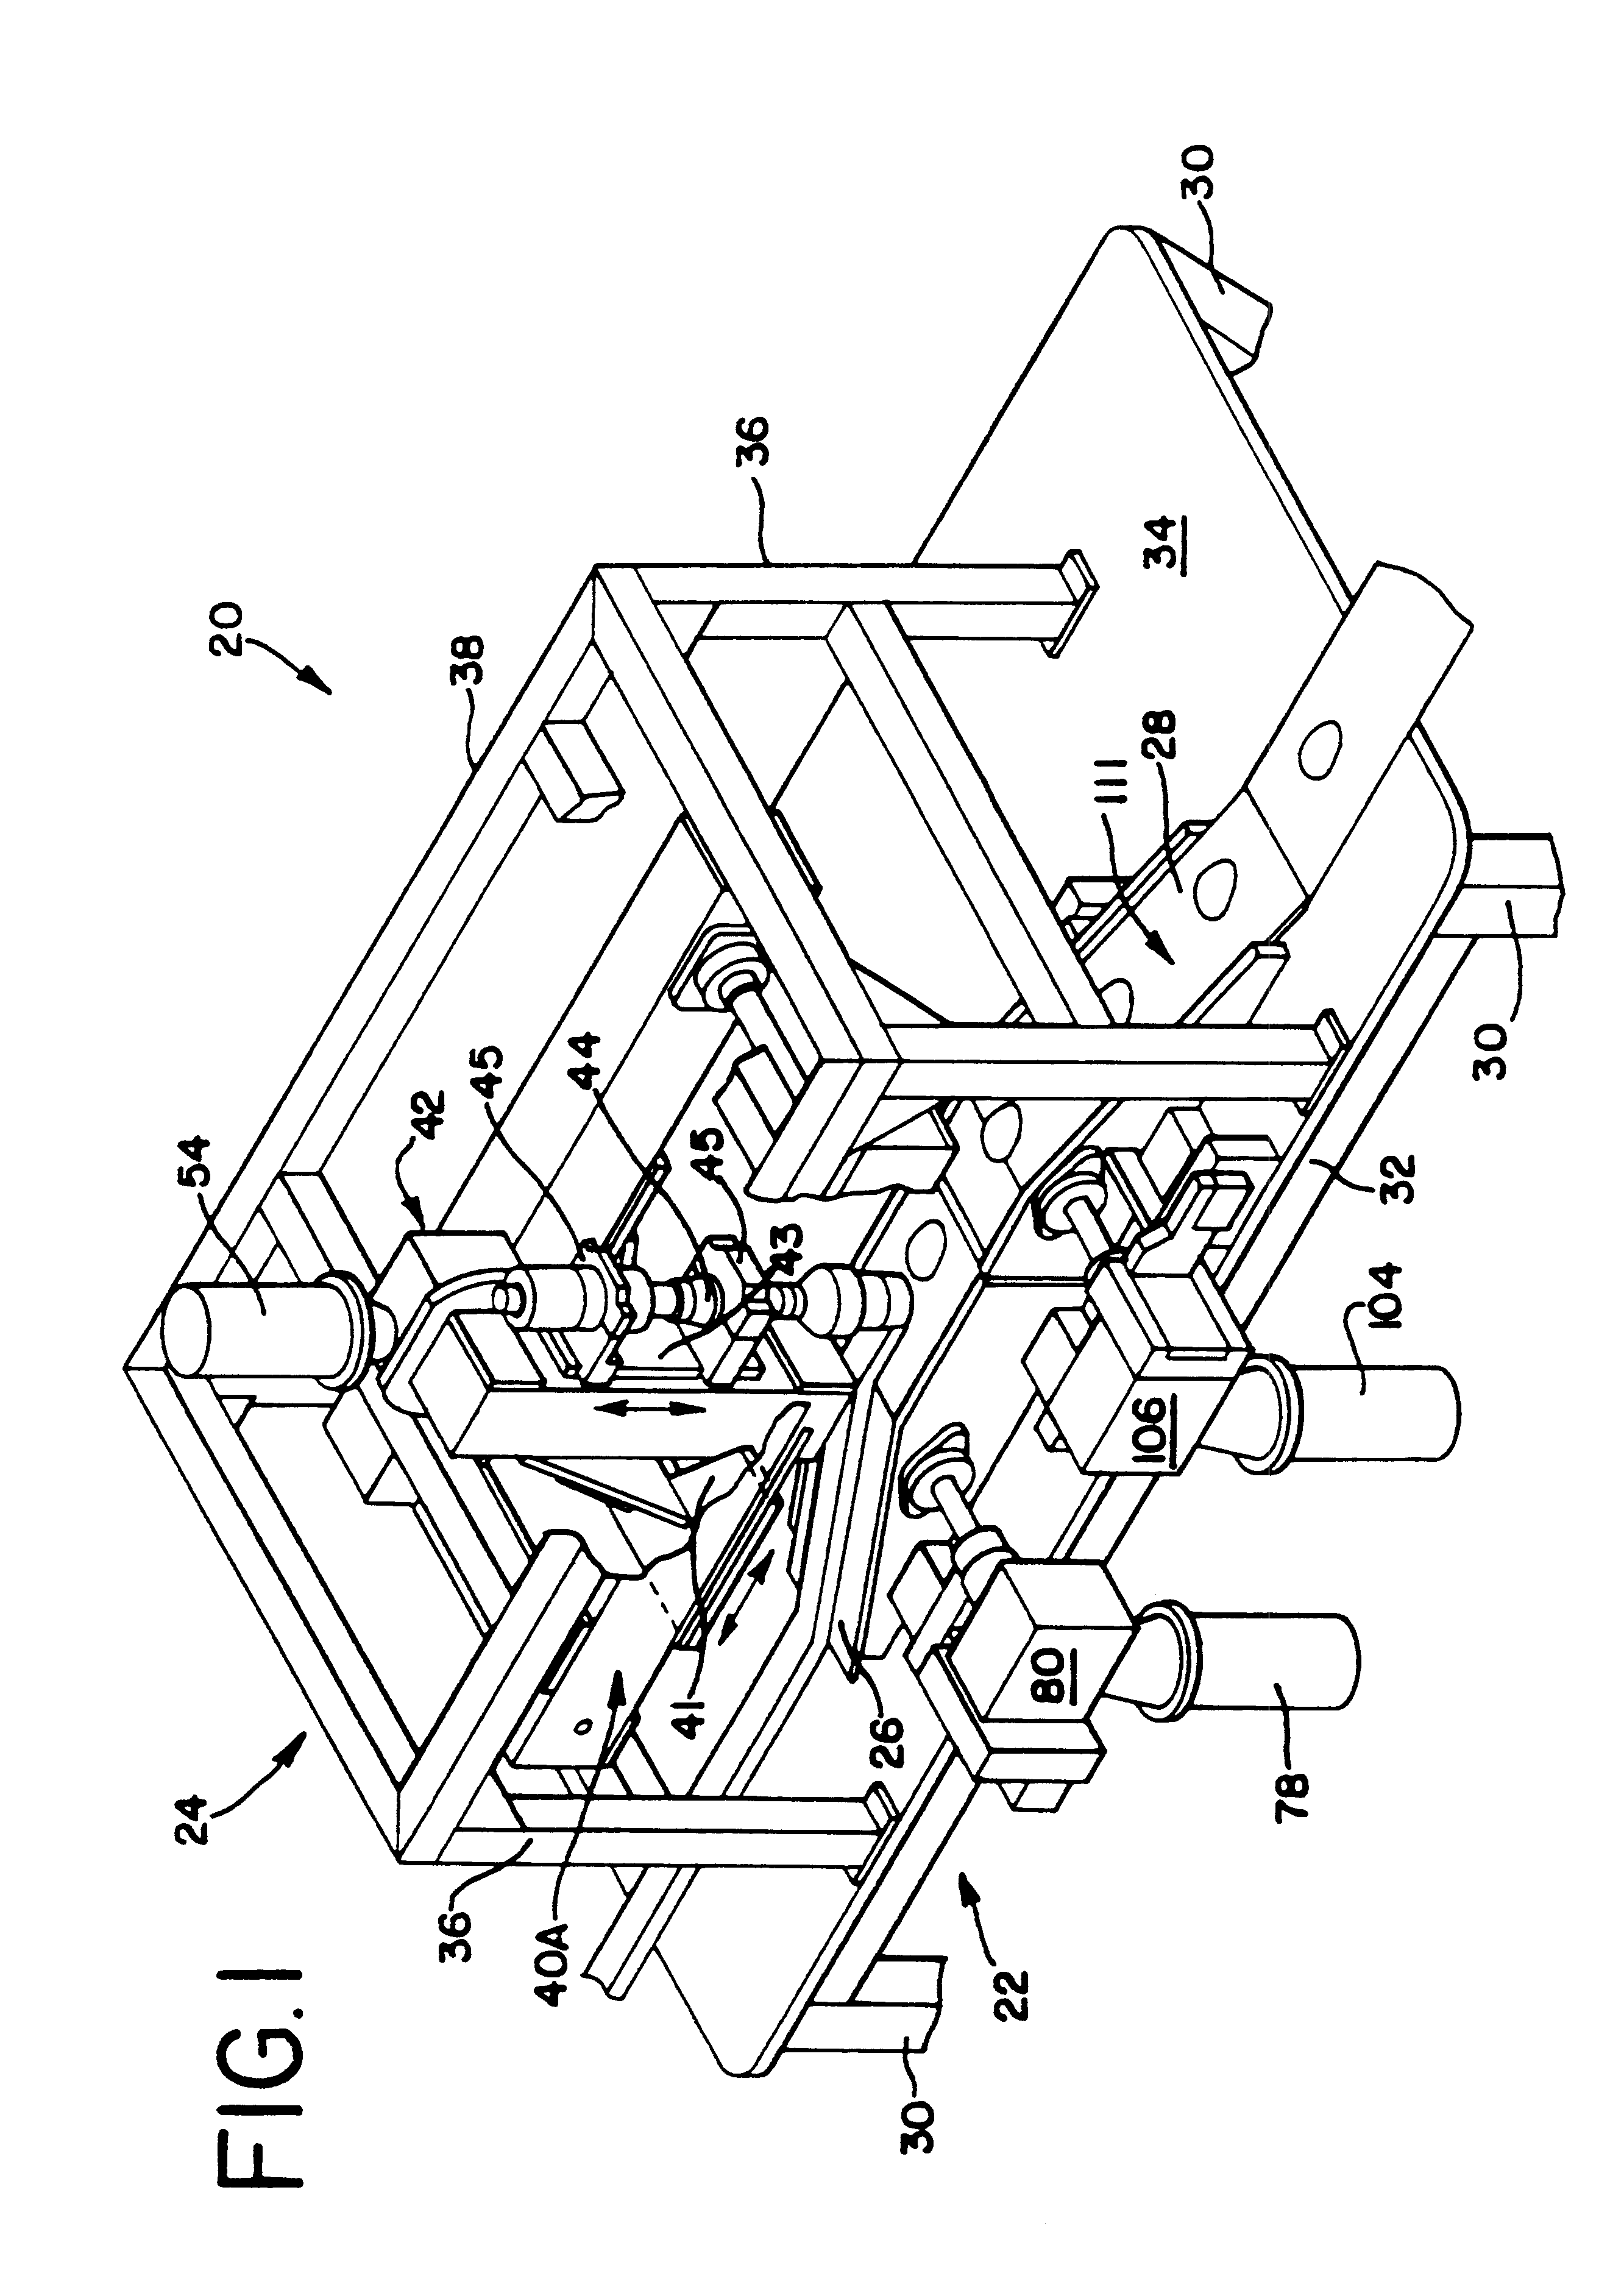 Ultrasonic forming of confectionery products